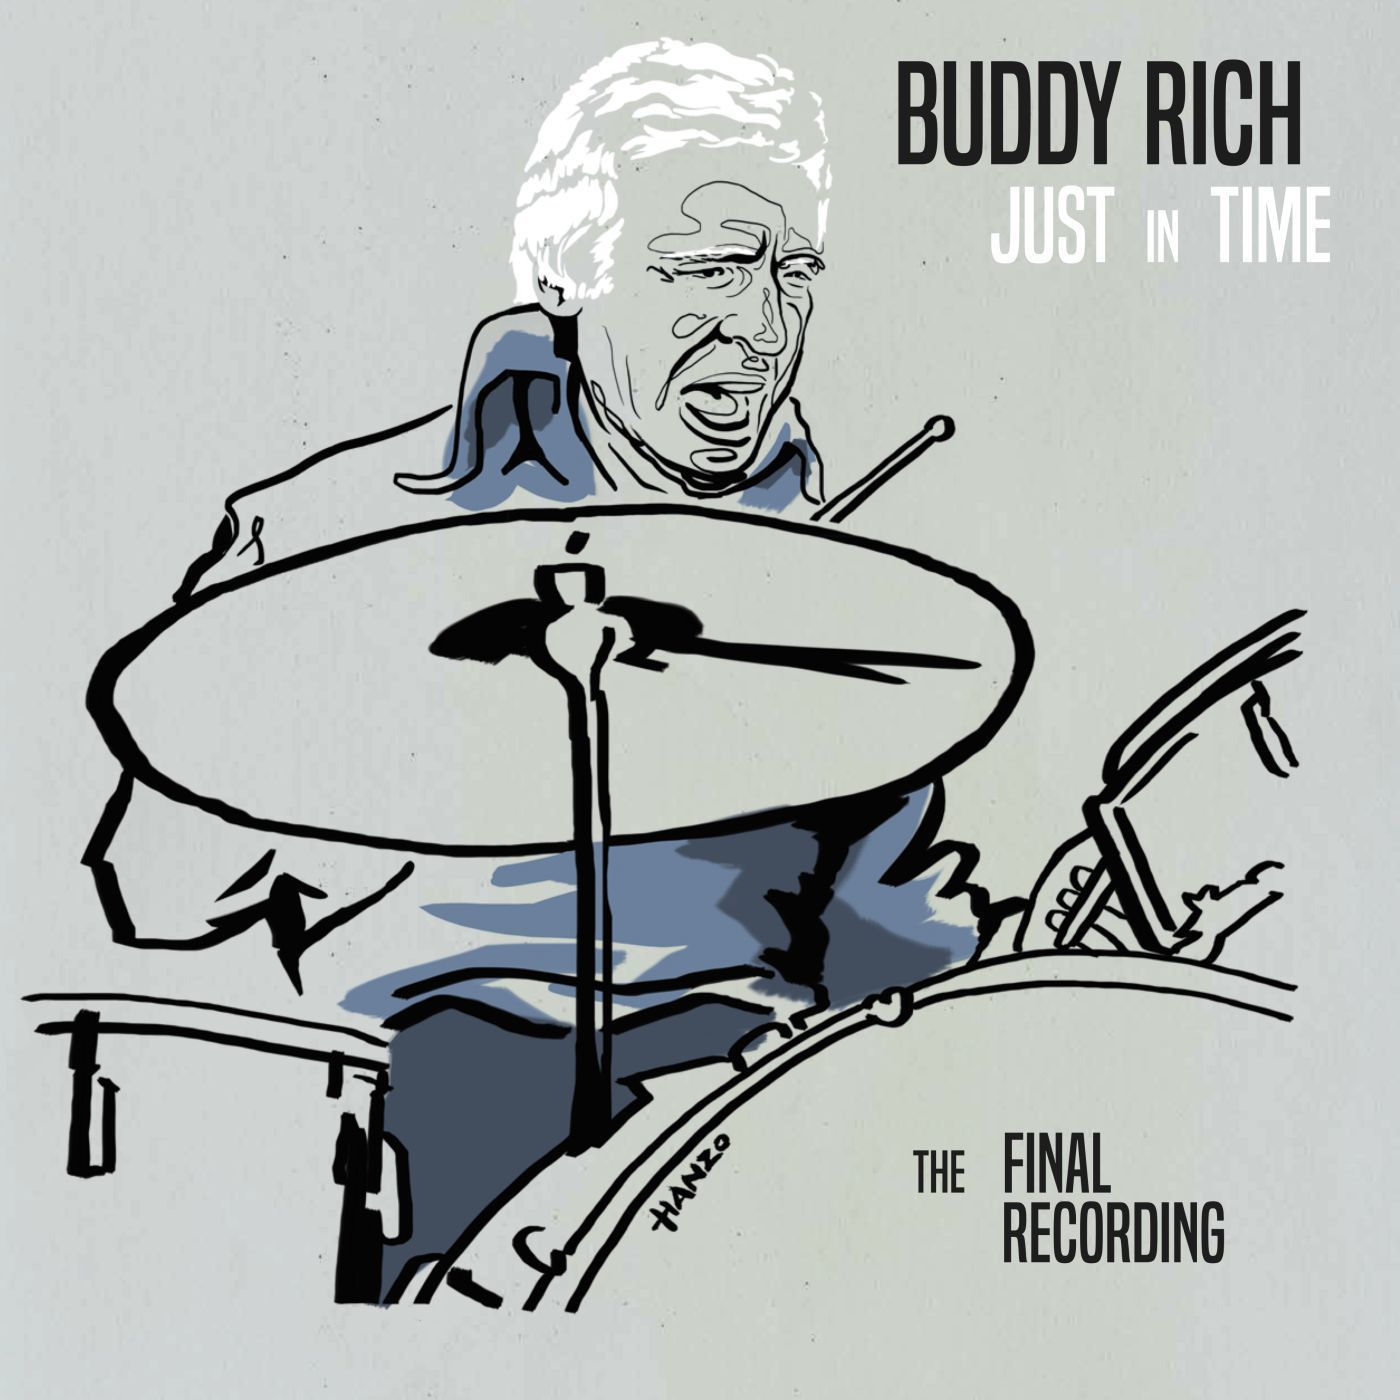 Buddy Rich - Just in Time: The Final Recording (2019) [FLAC 24bit/96kHz]